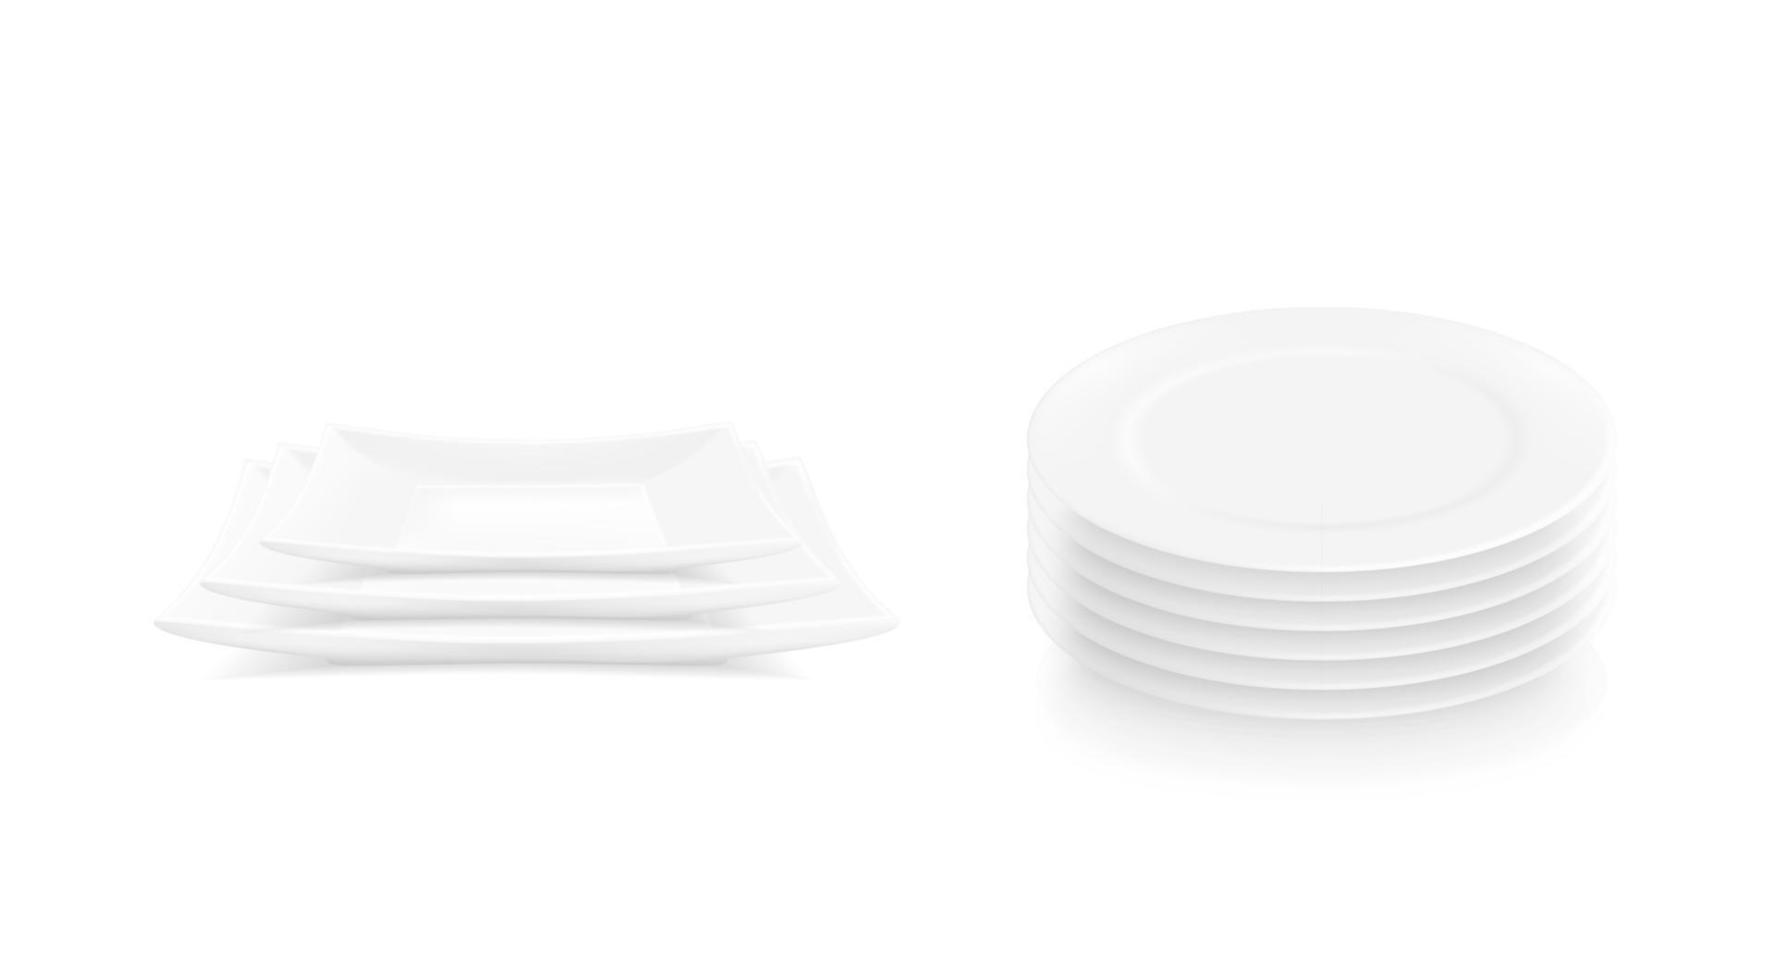 Vector realistic stacks of plates. White porcelain plates in stacks.